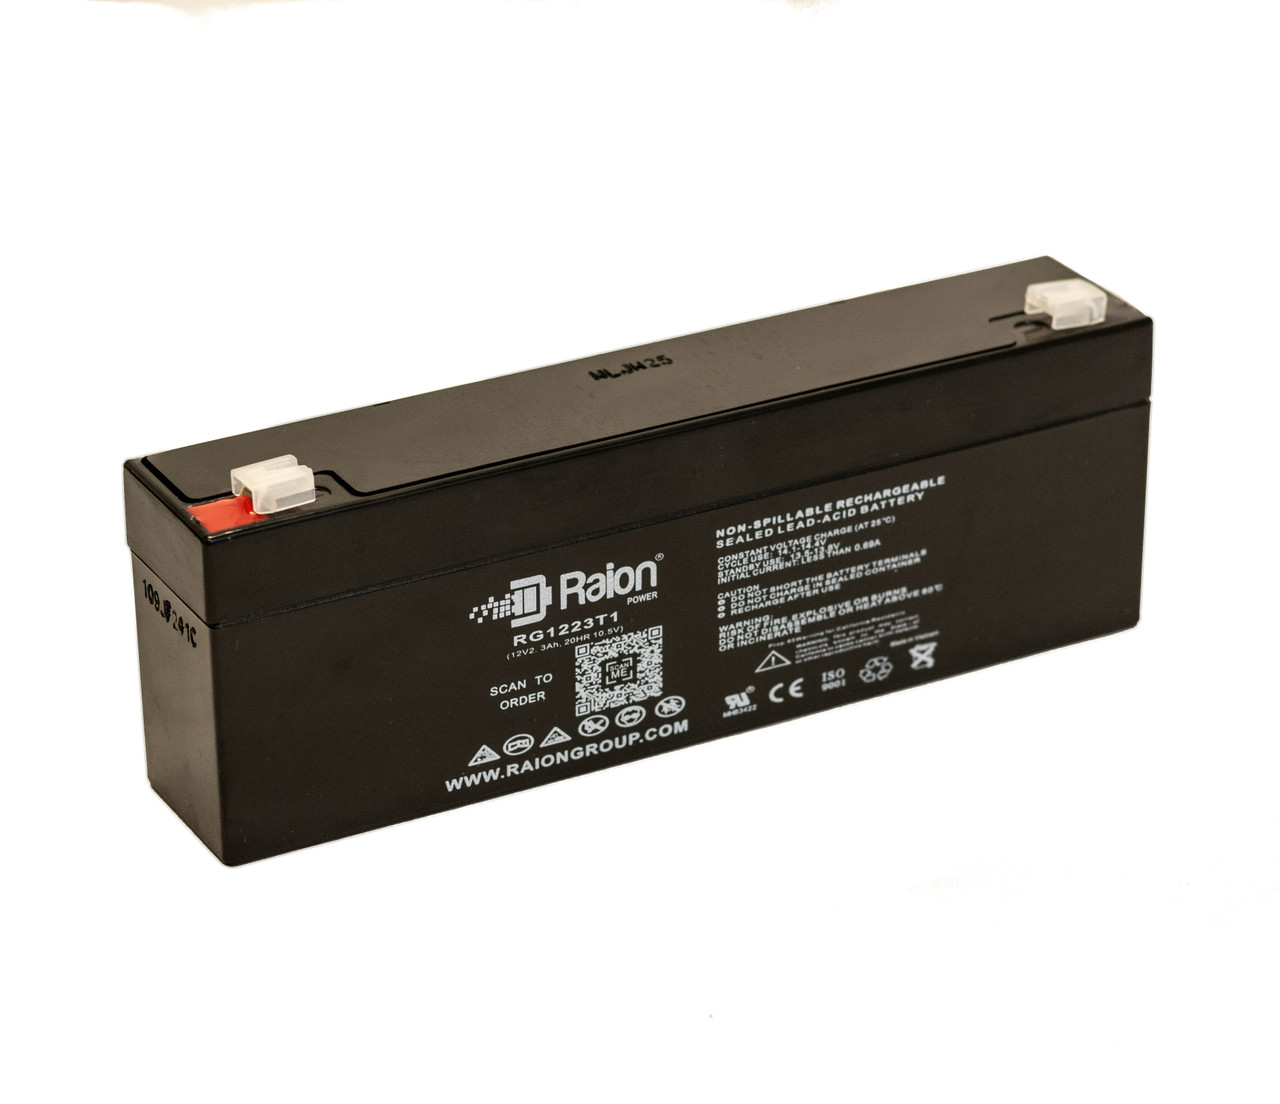 Raion Power RG1223T1 Replacement Battery for Douglas DBG12-2F